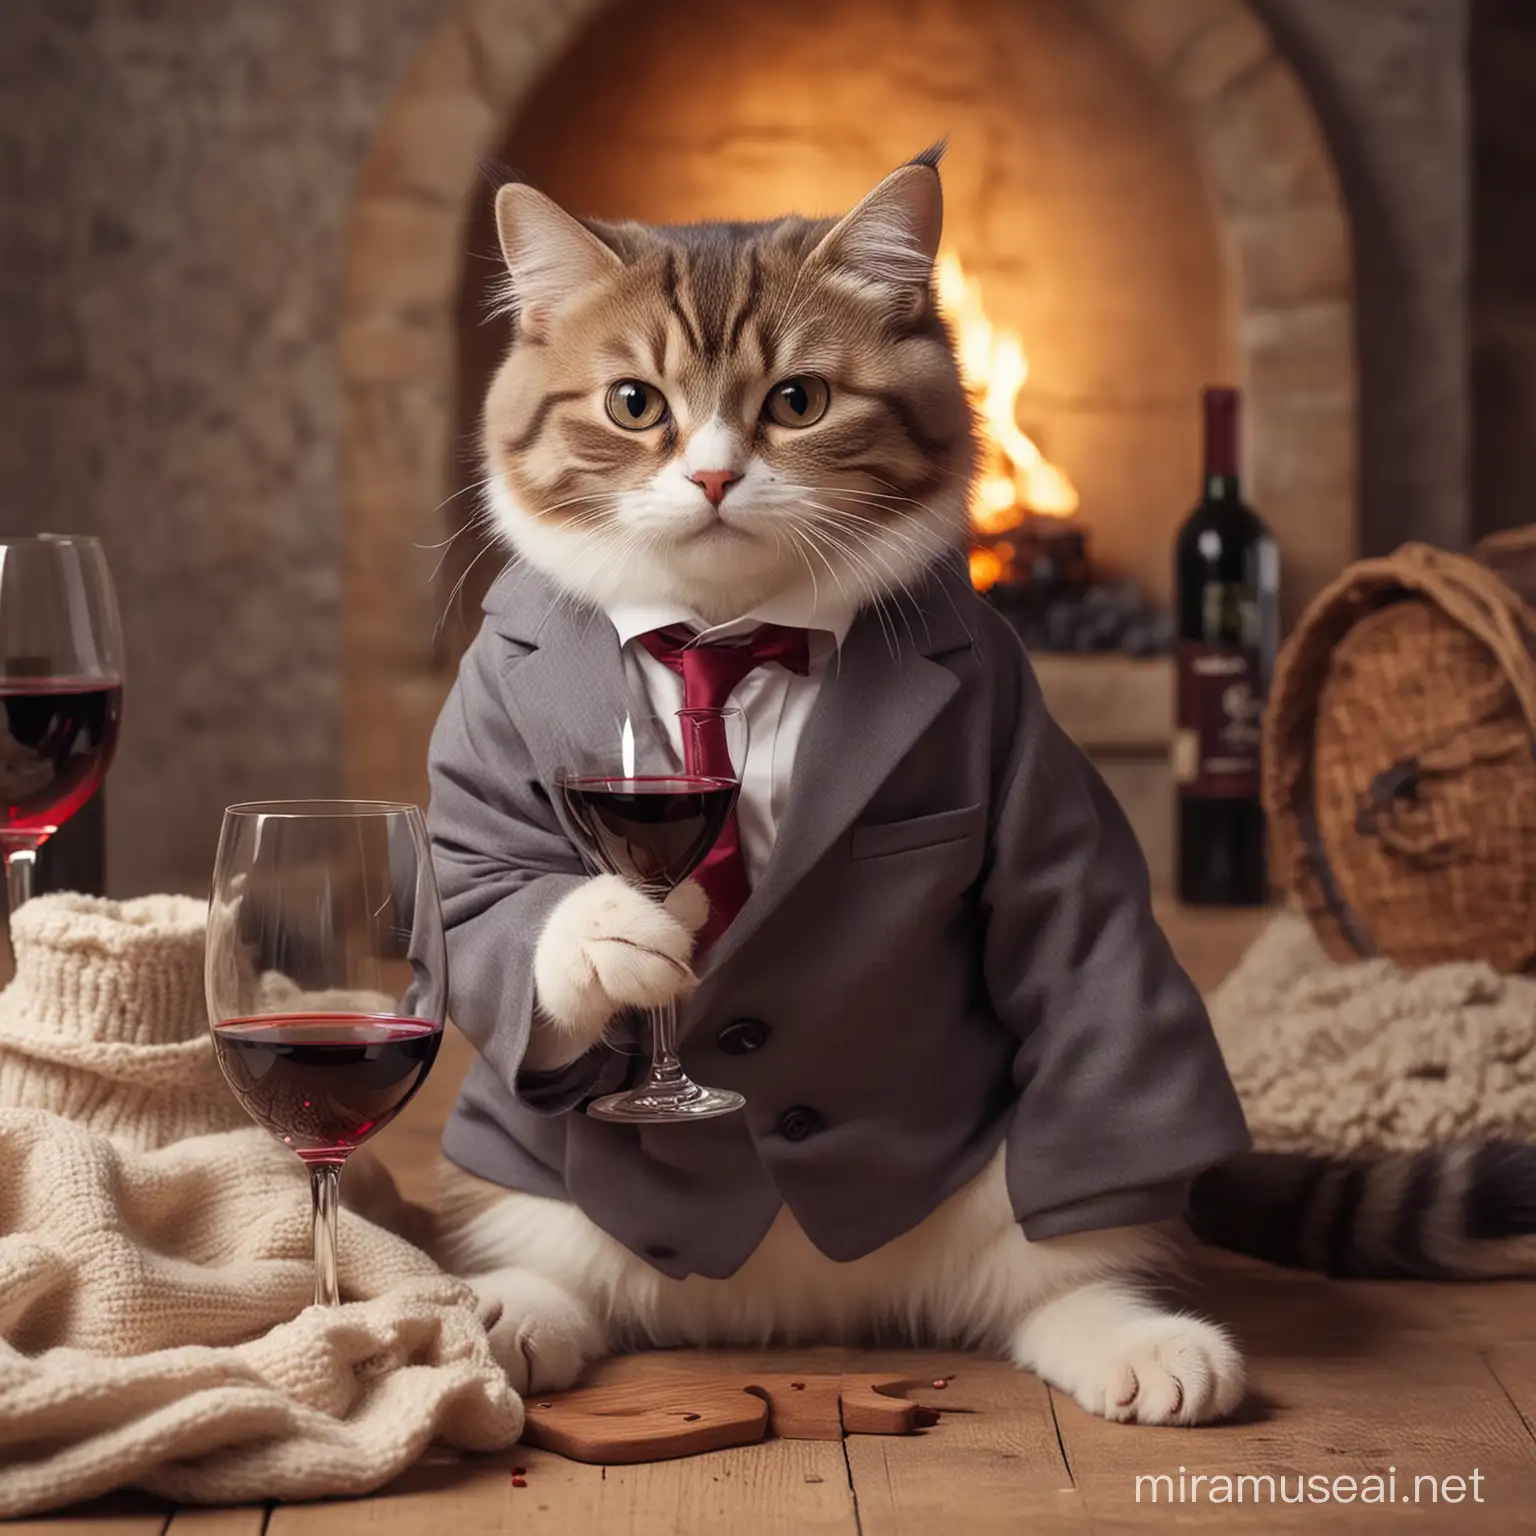 Sophisticated Cat Enjoying Wine in a Cozy Setting